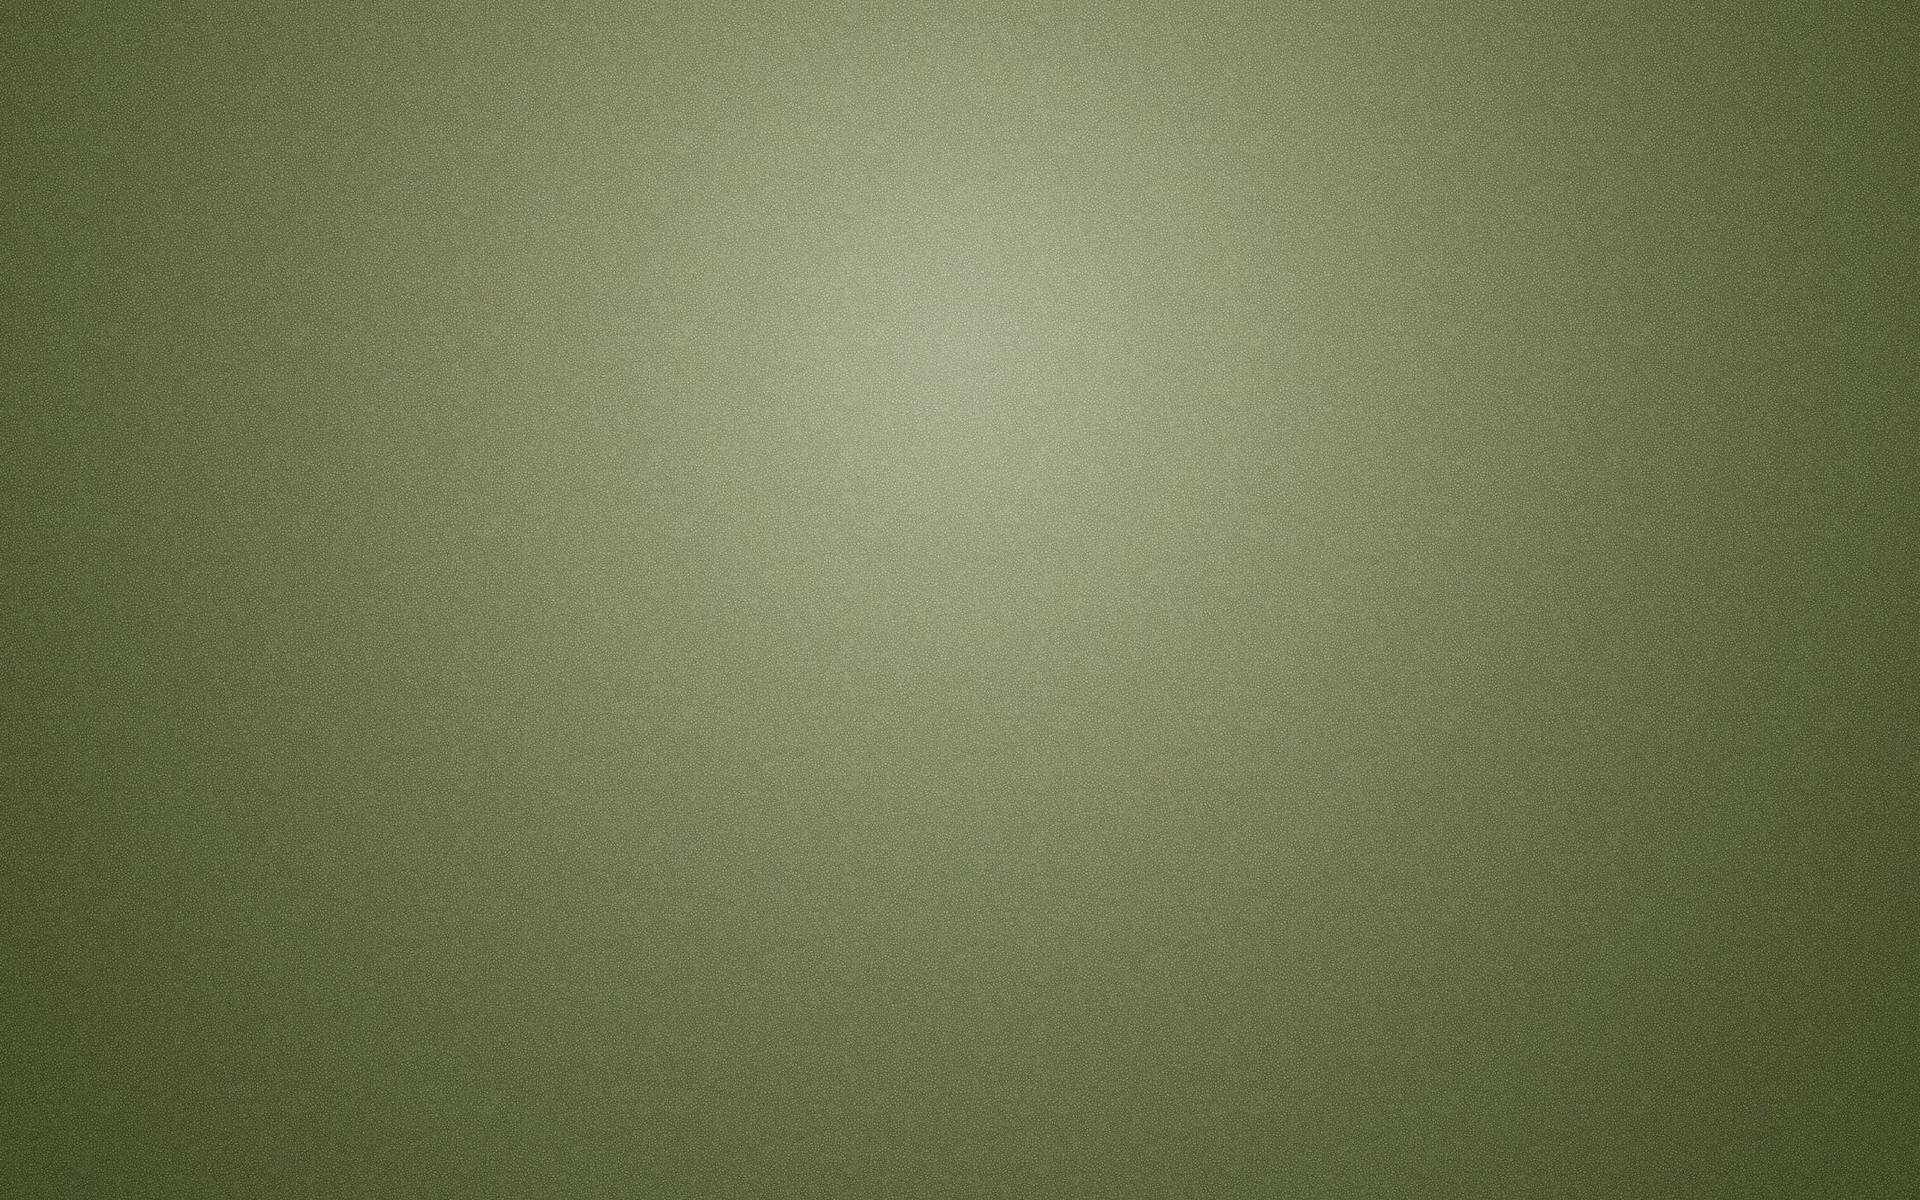 Solid Color 2560X1600 Wallpaper and Background Image